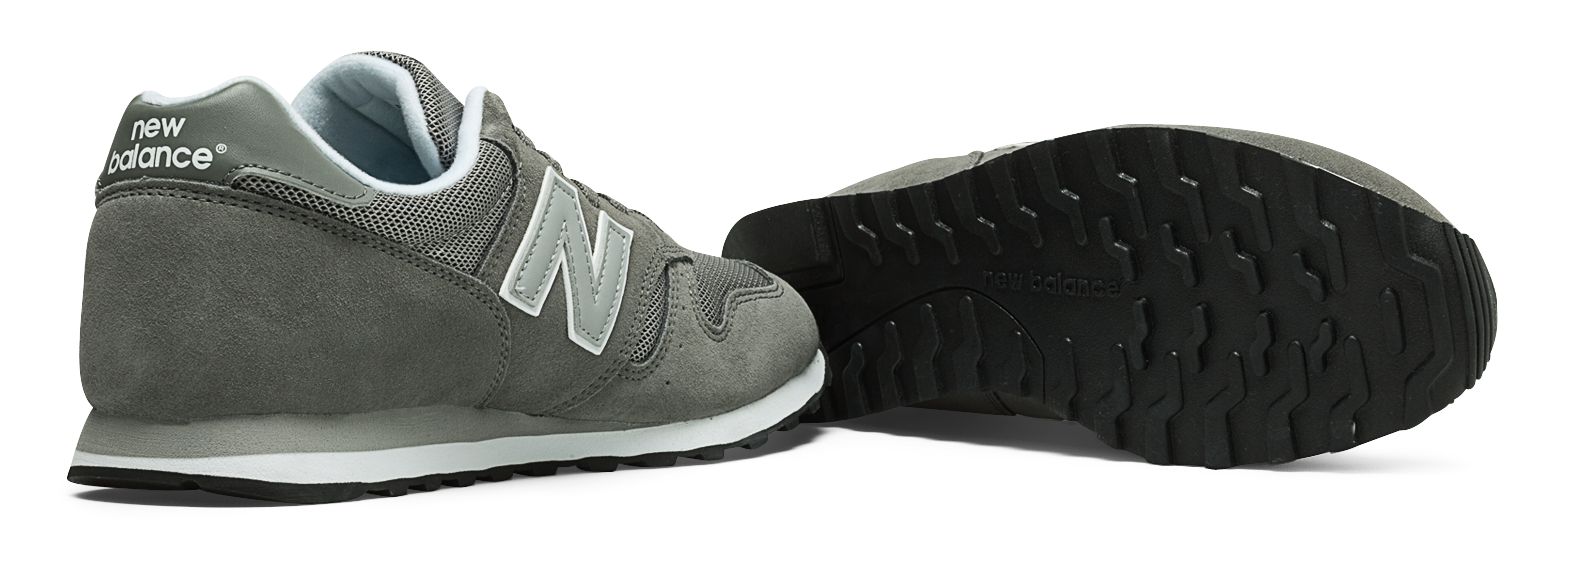 New Balance ML373 on Sale - Discounts Up to 21% Off on ML373MMA at Joe's New  Balance Outlet